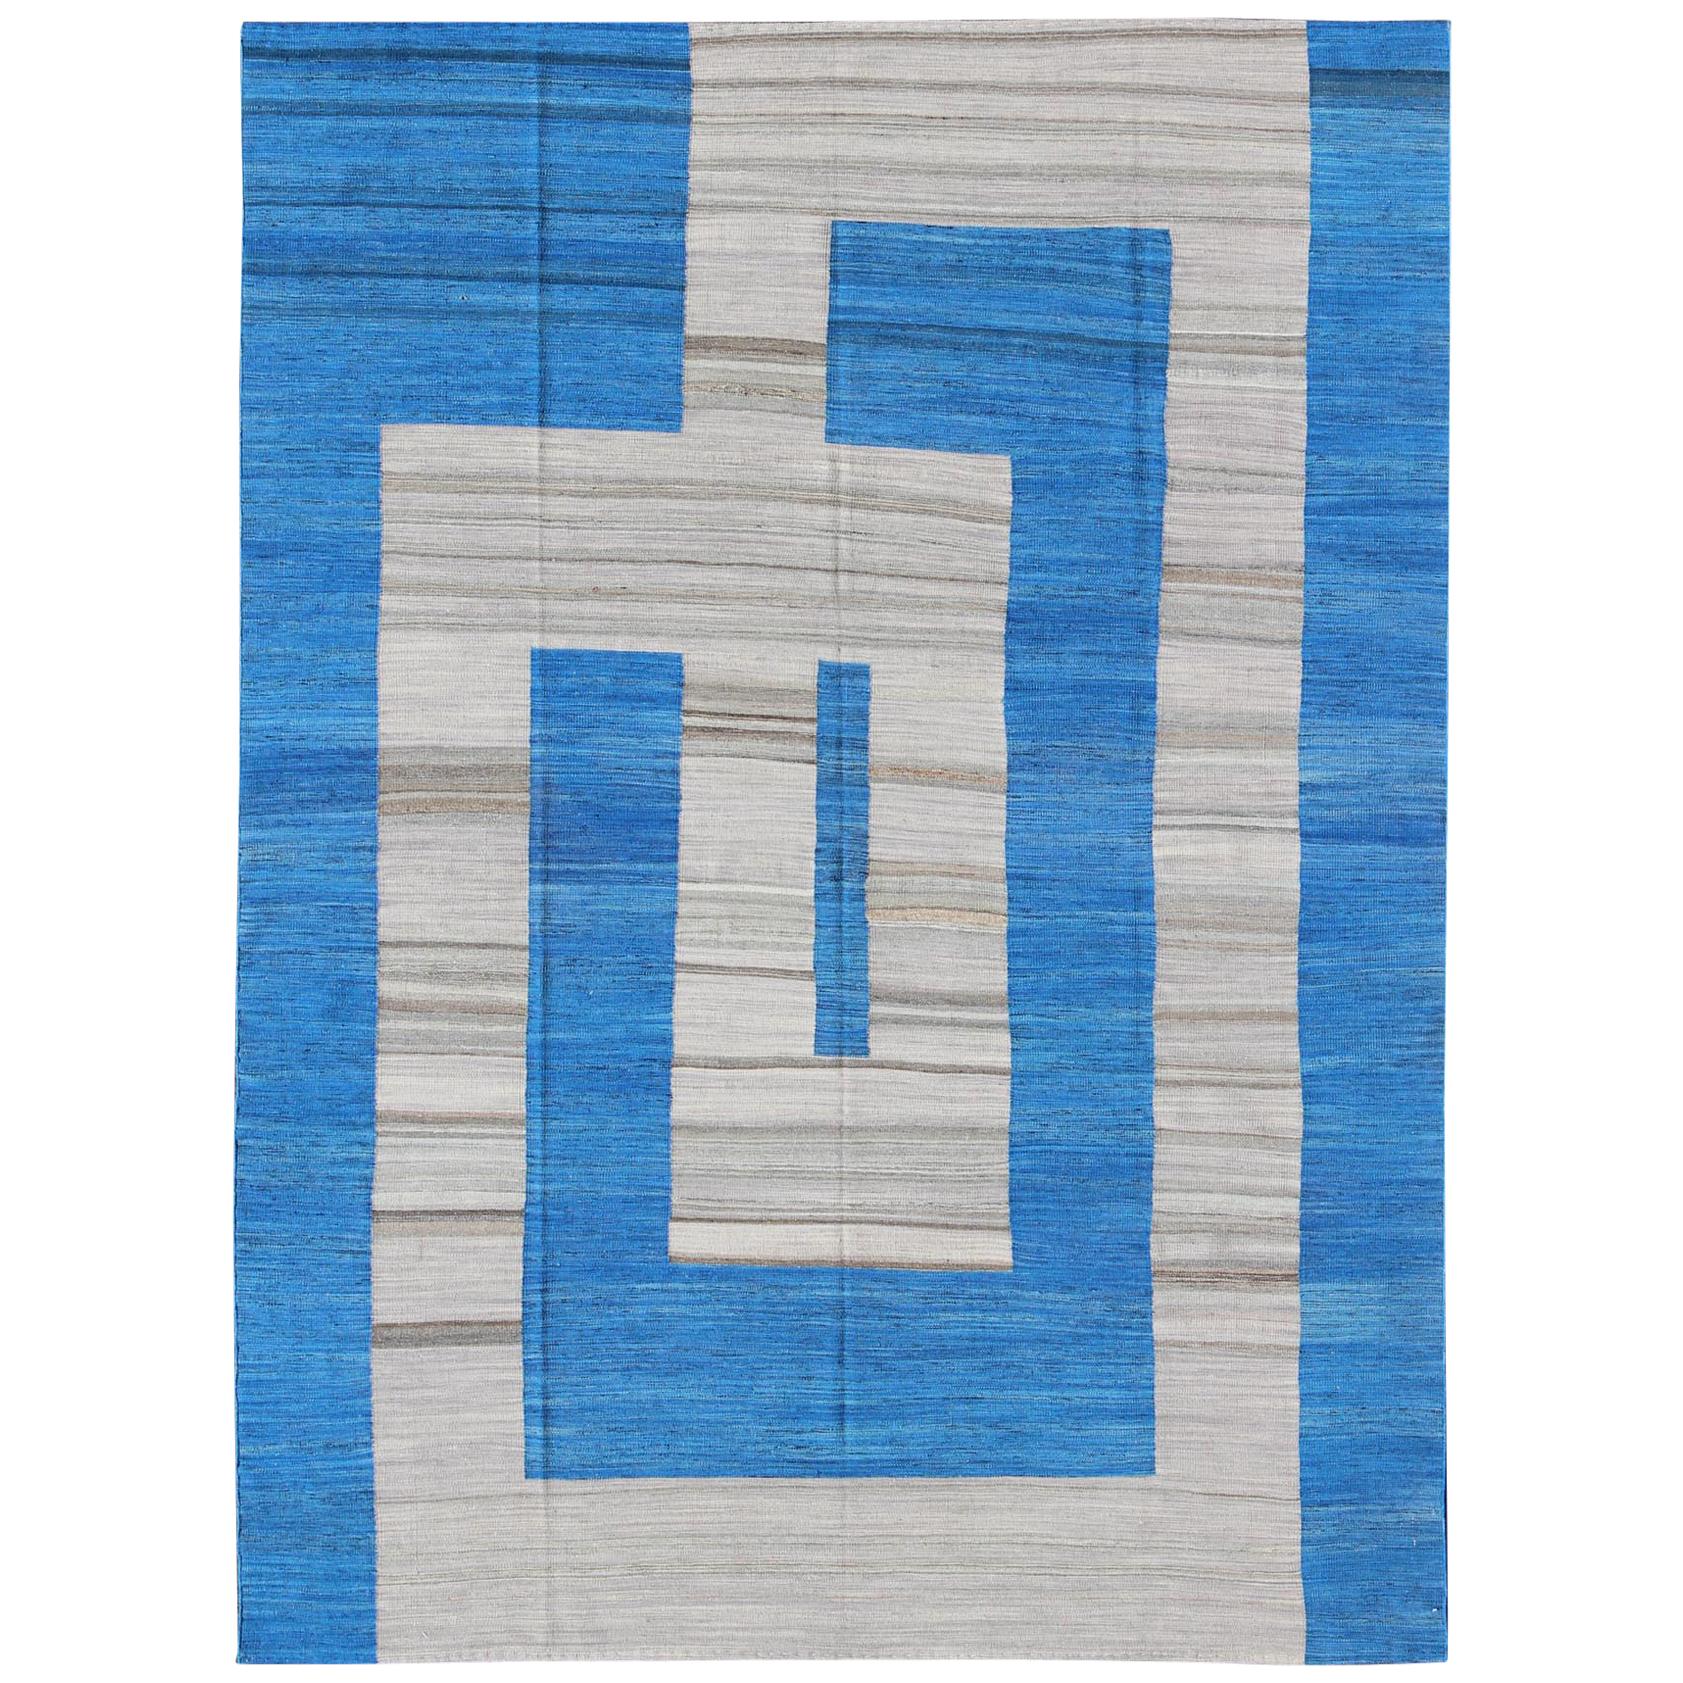 Fine Weave Kilim Rug with Large Modern Pattern in Cobalt Blue and Gray